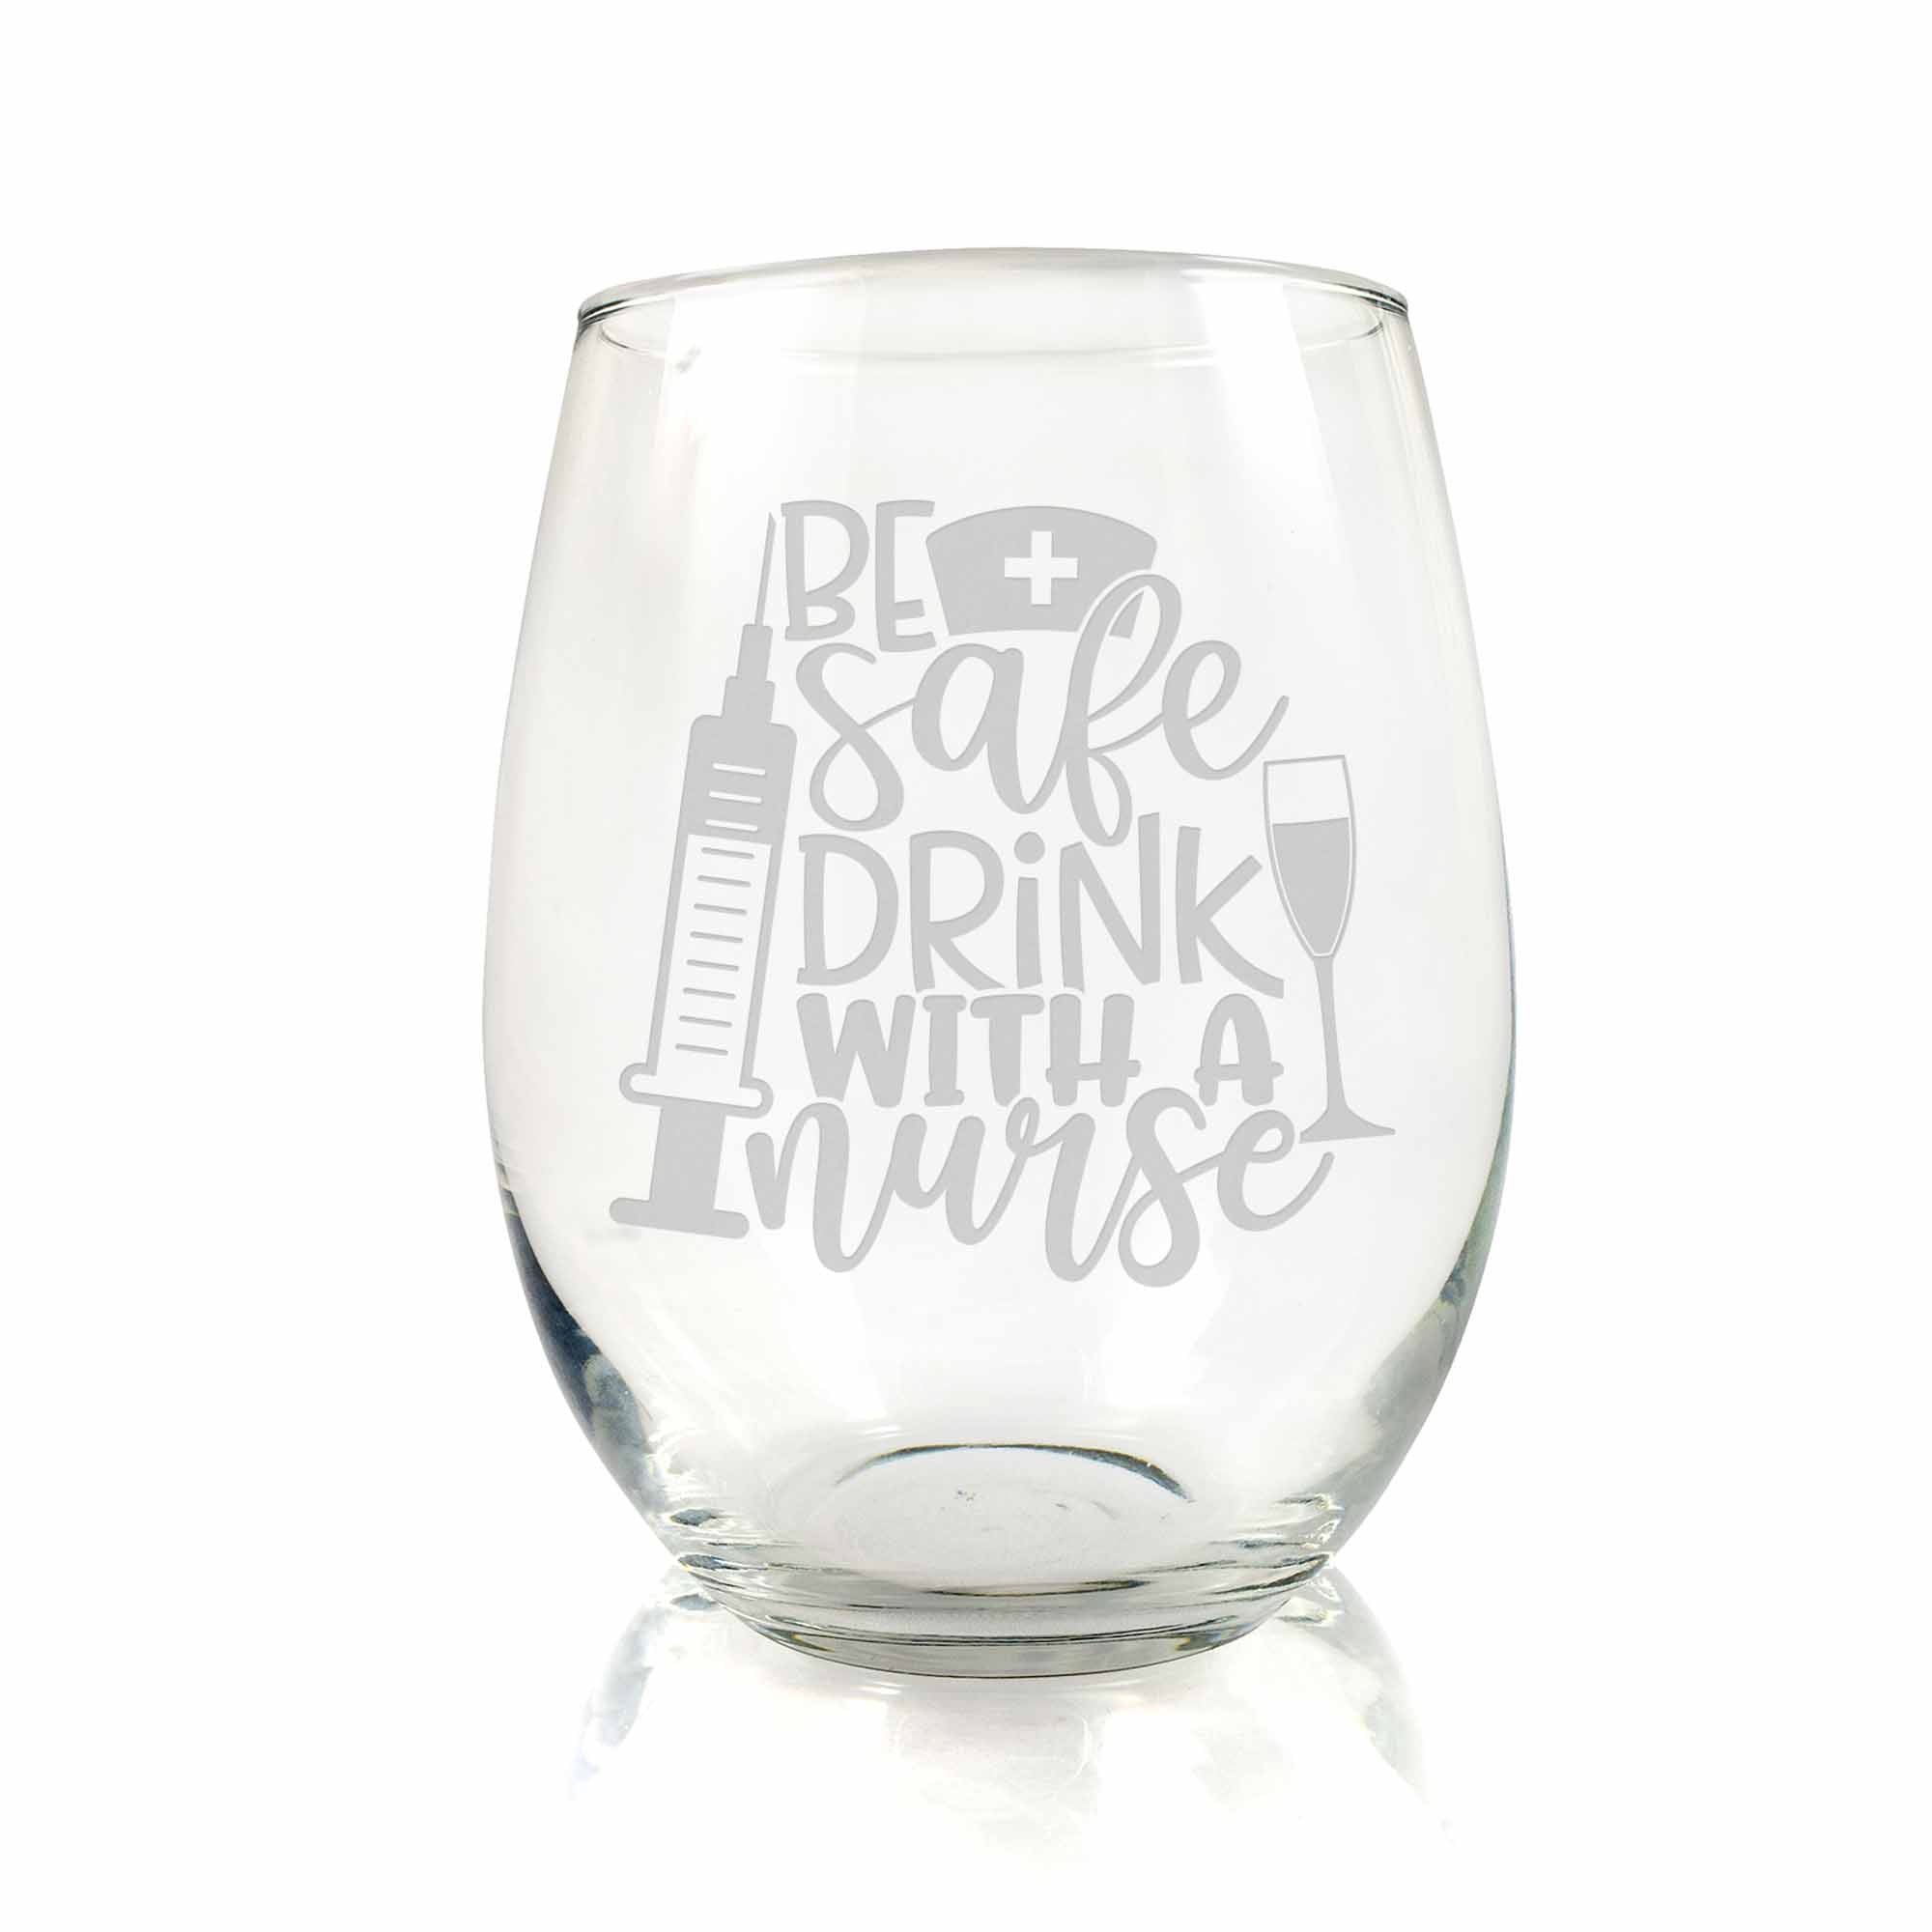 Funny drinking glasses